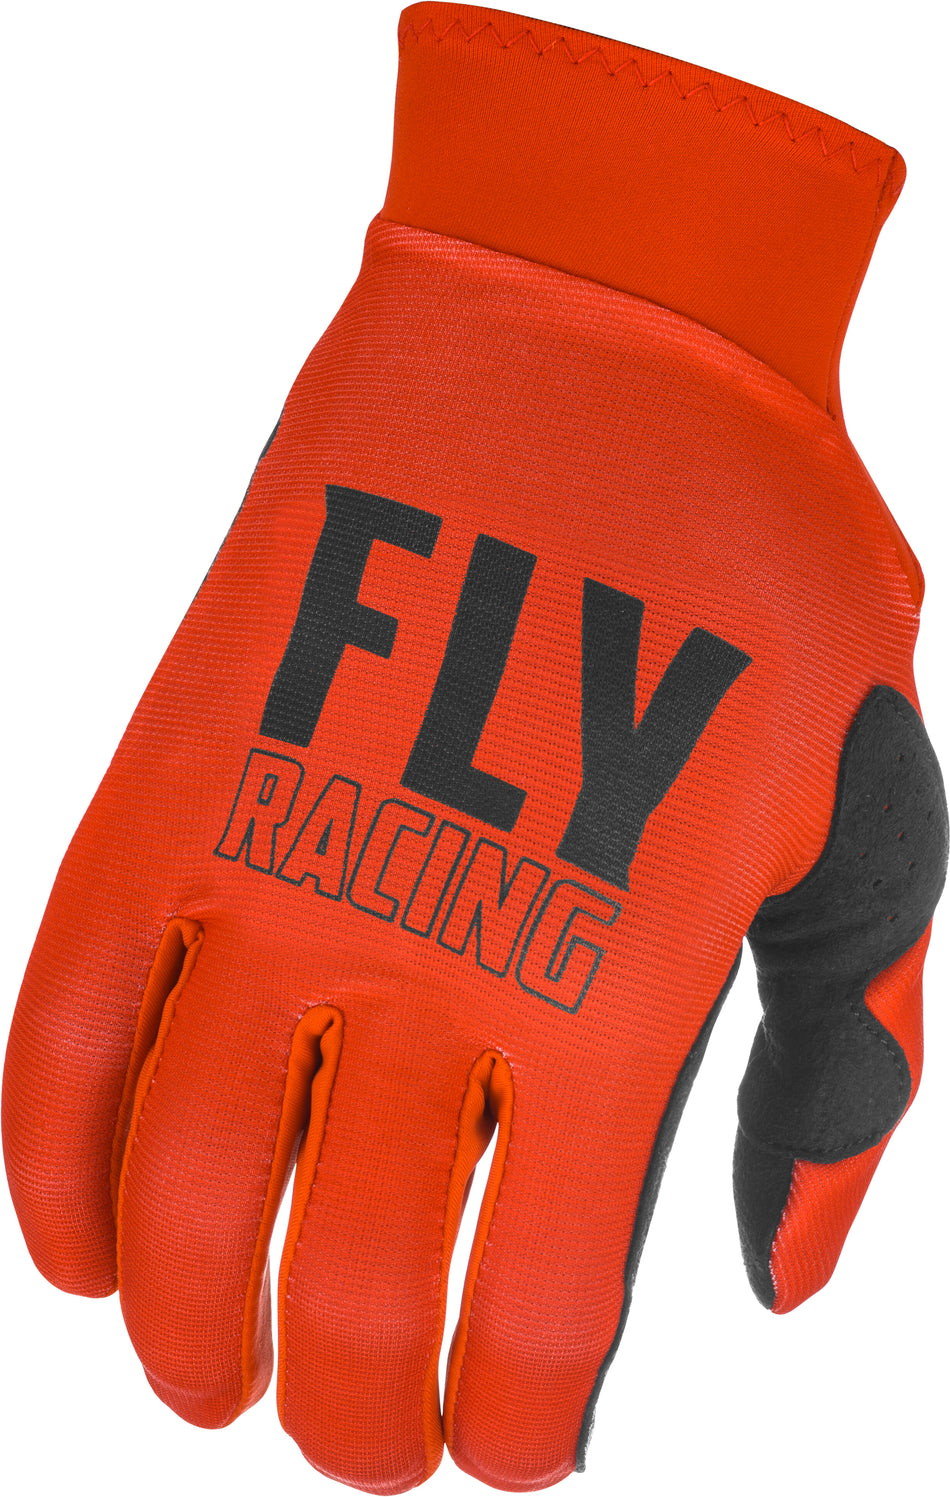 FLY RACING Pro Lite Gloves Red/Black Sz 07 374-85207